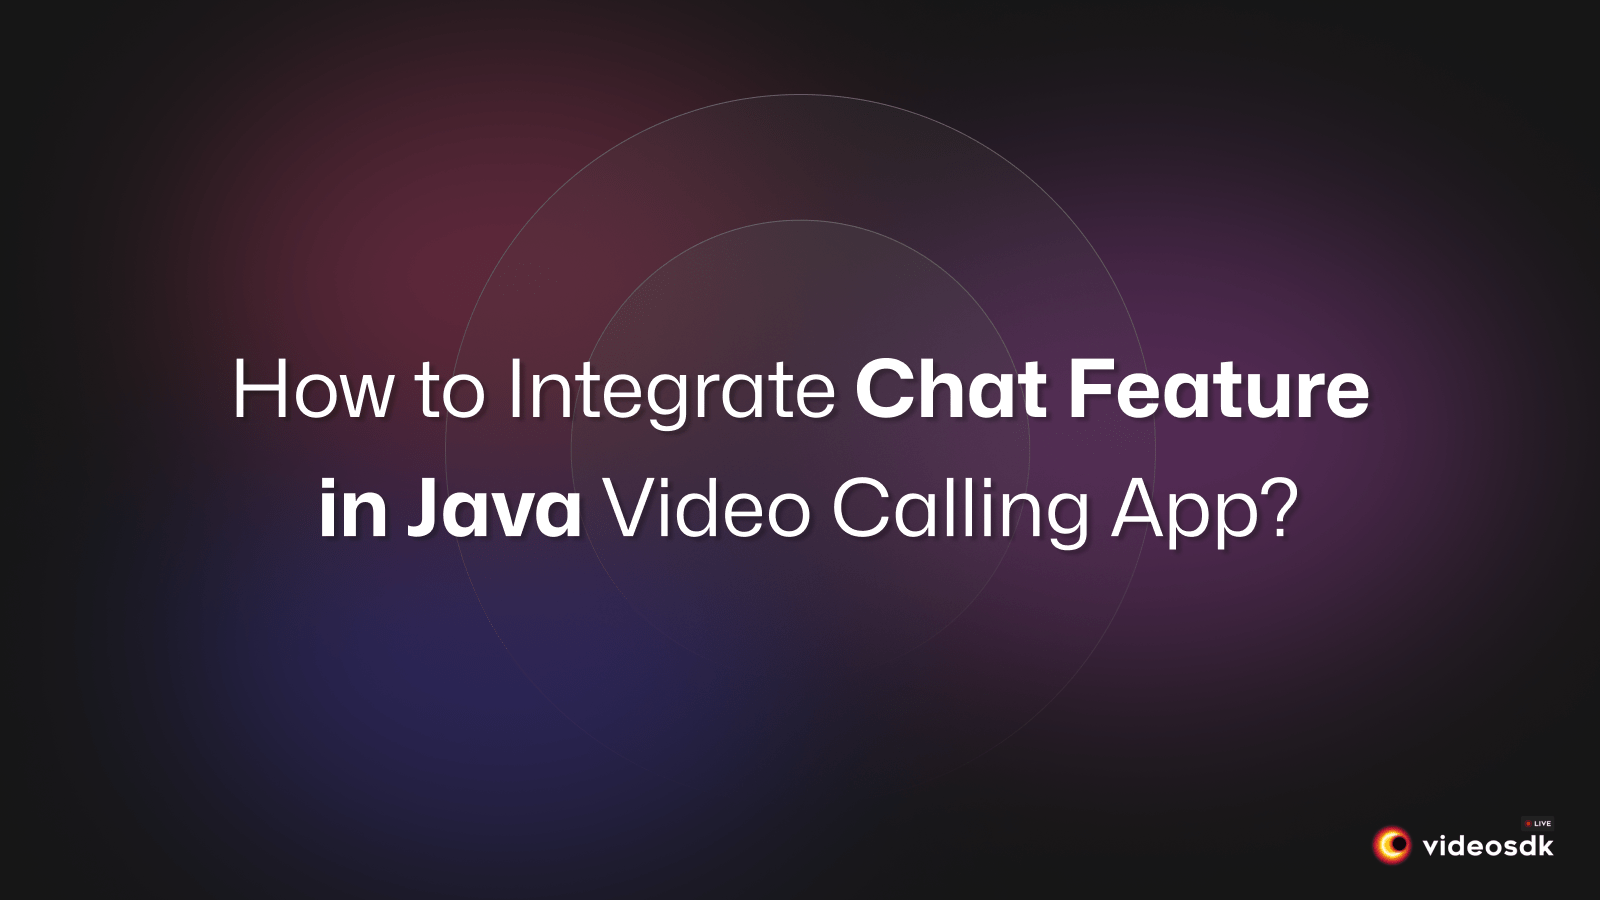 How to Integrate Chat Feature in Android(Java) Video Calling App?